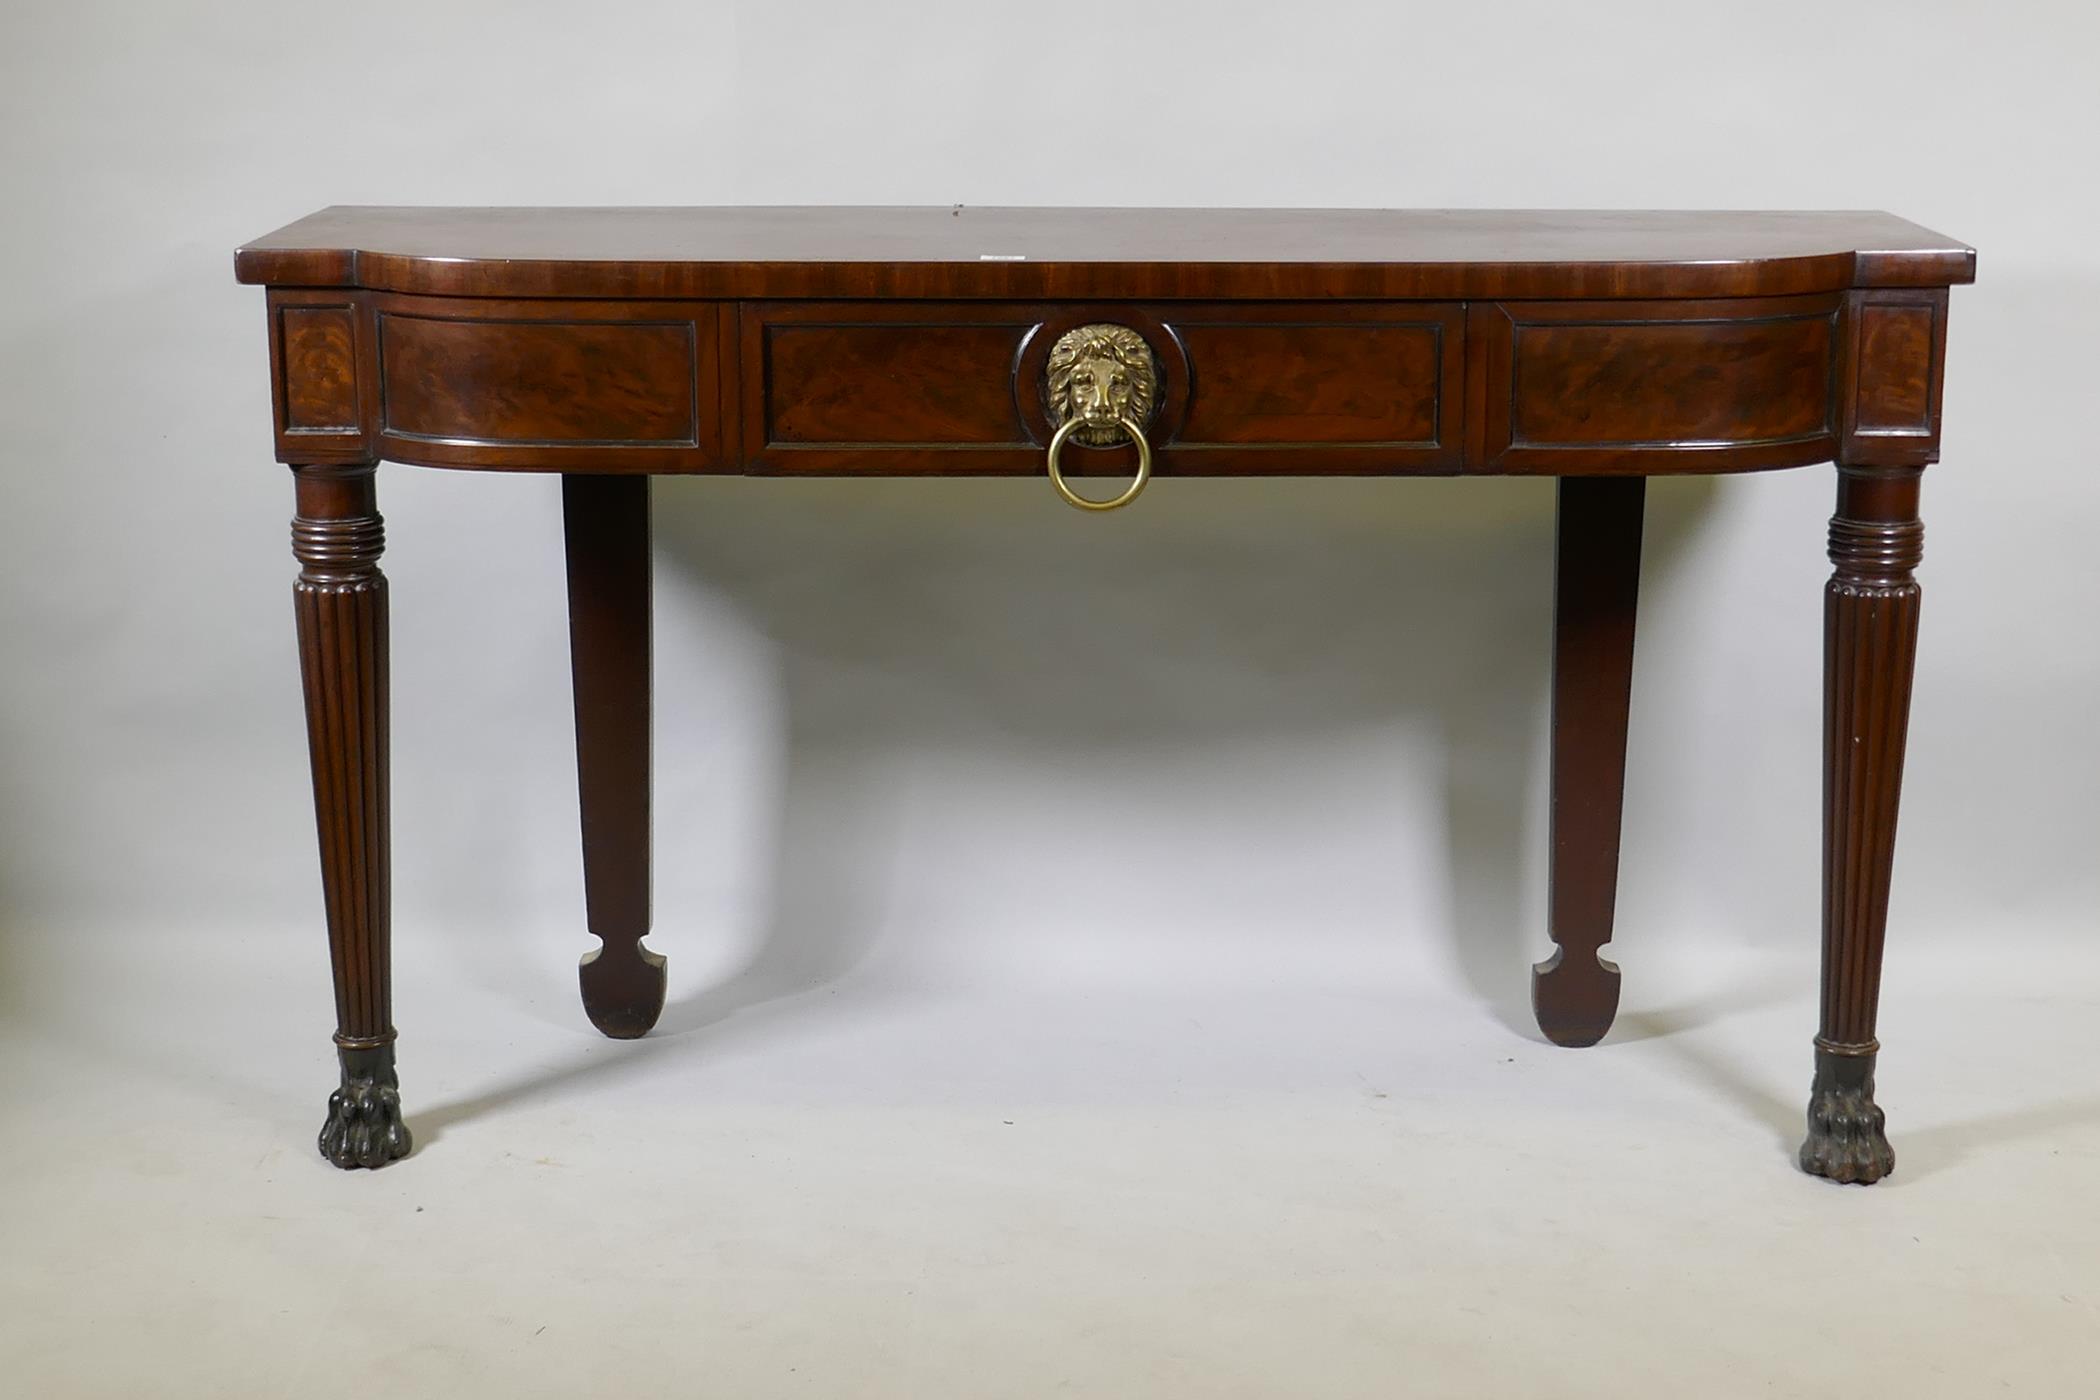 A Georgian mahogany breakfront serving table with panelled frieze and single drawer, raised on